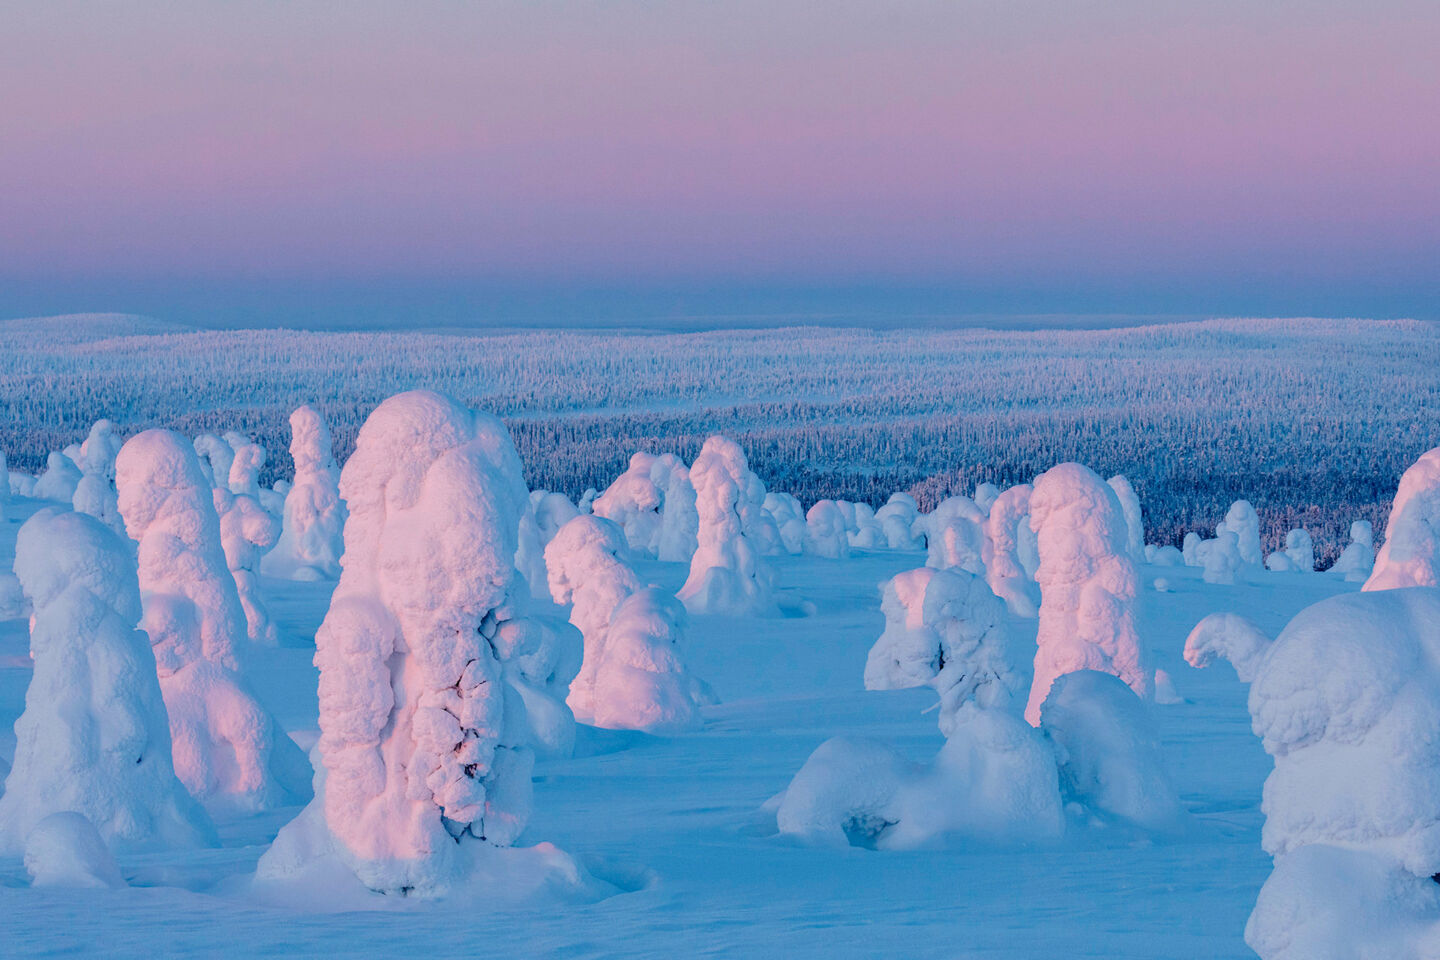 Polar night over snow-crowned trees in Riisitunturi National Park in Posio, a Finnish Lapland filming location